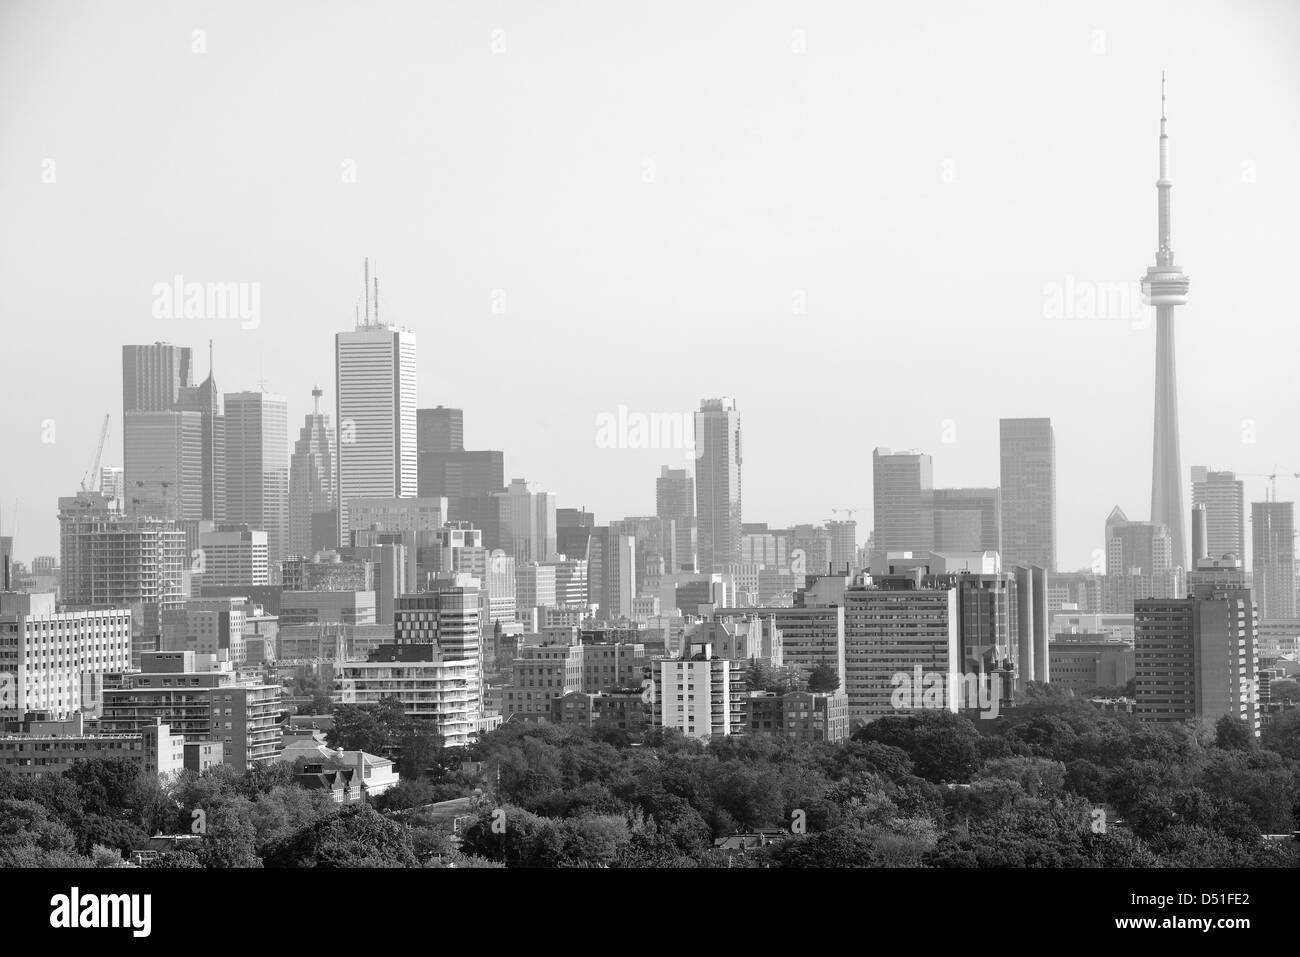 Toronto city skyline view with park and urban buildings in black and white Stock Photo